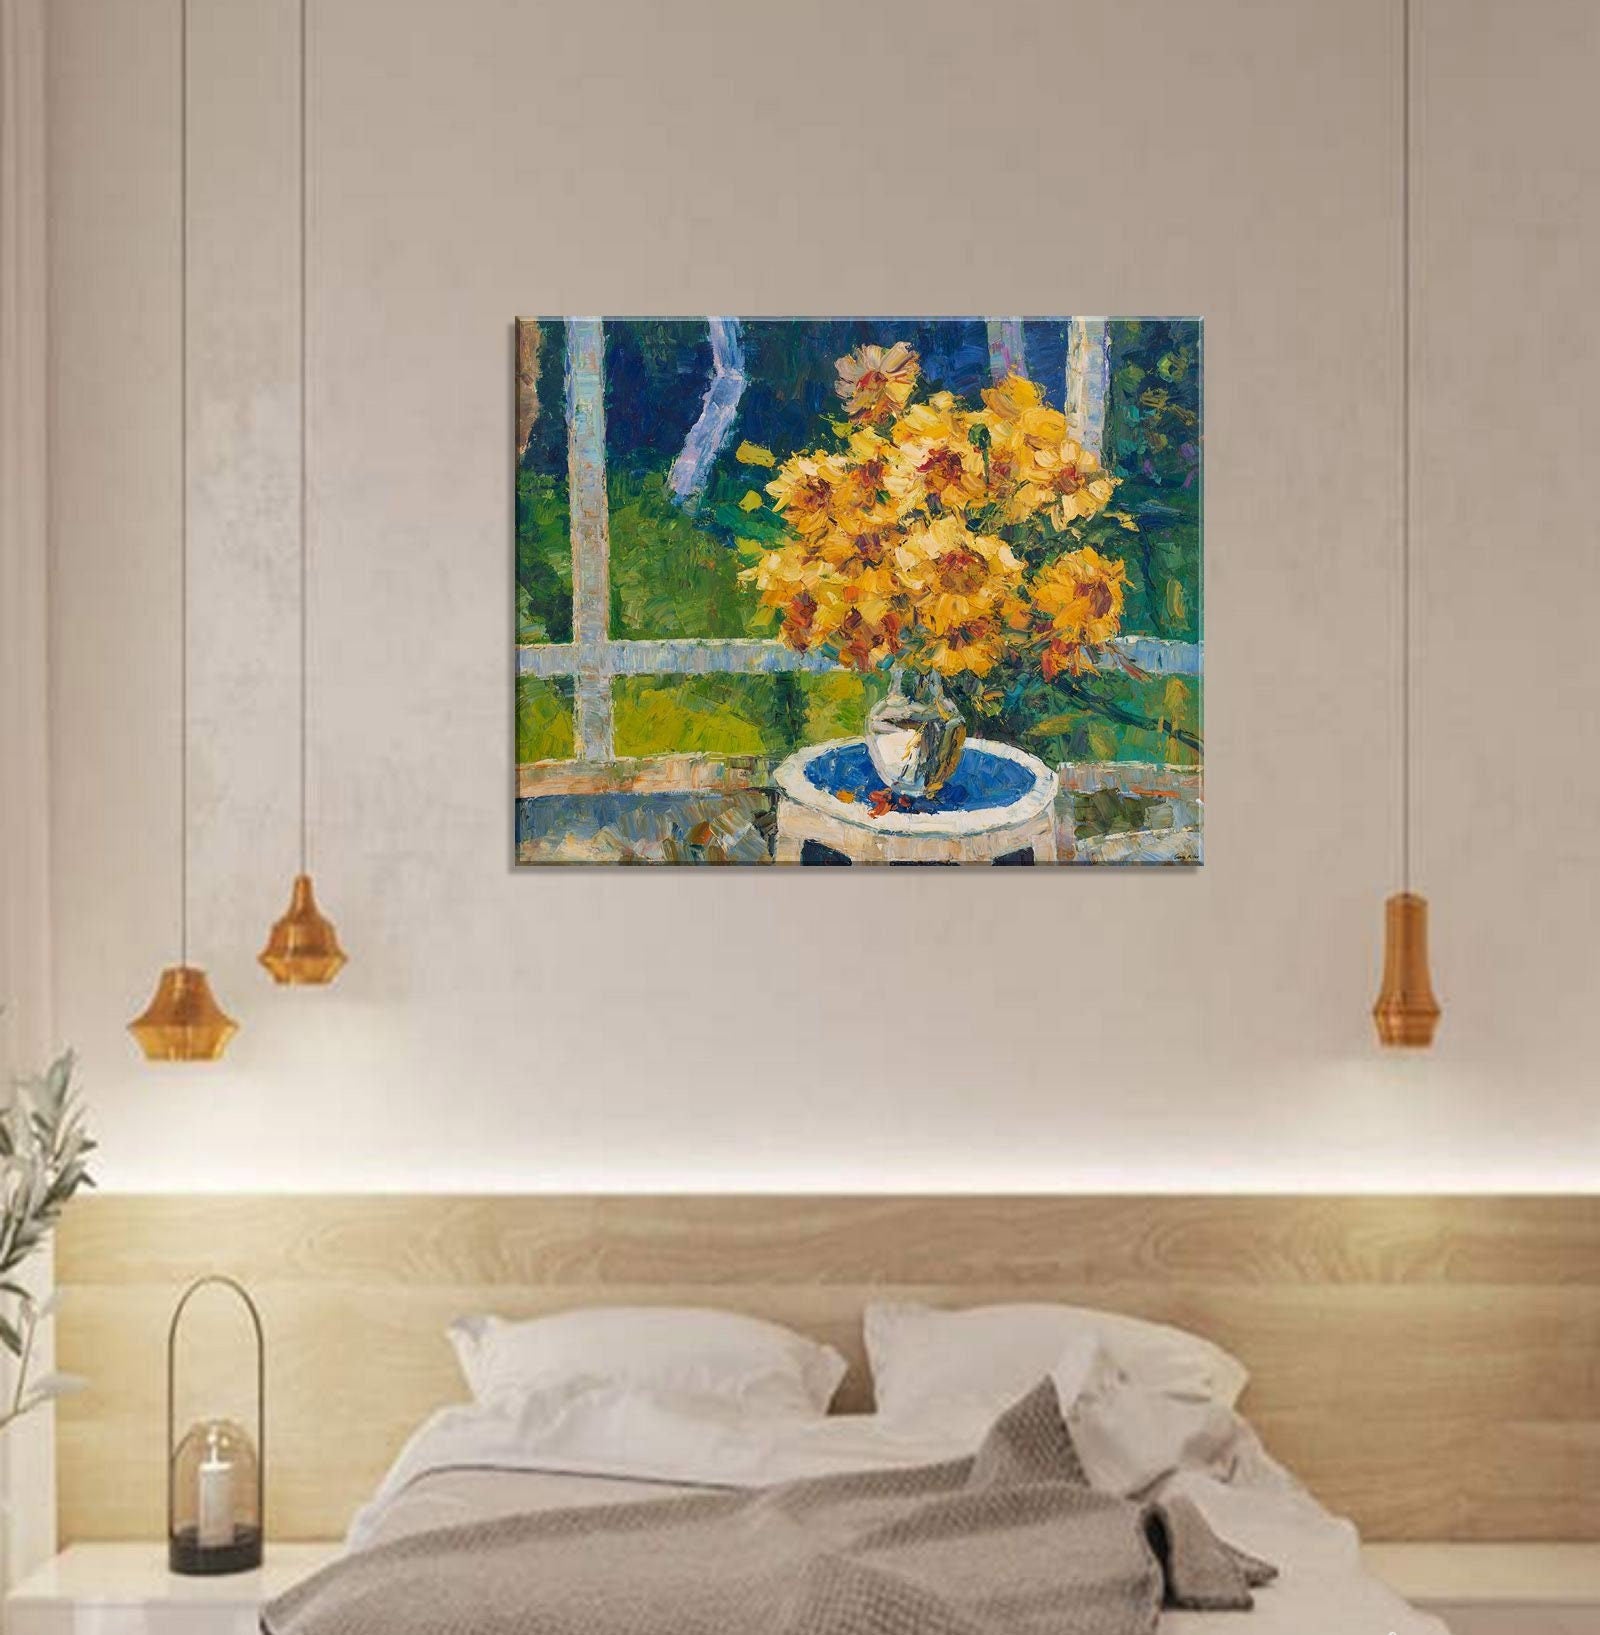 Sunflower Oil Painting, Flower Art, Large Canvas Painting, Abstract Canvas Painting, Wall Decor, Original Painting, Palette Knife Painting